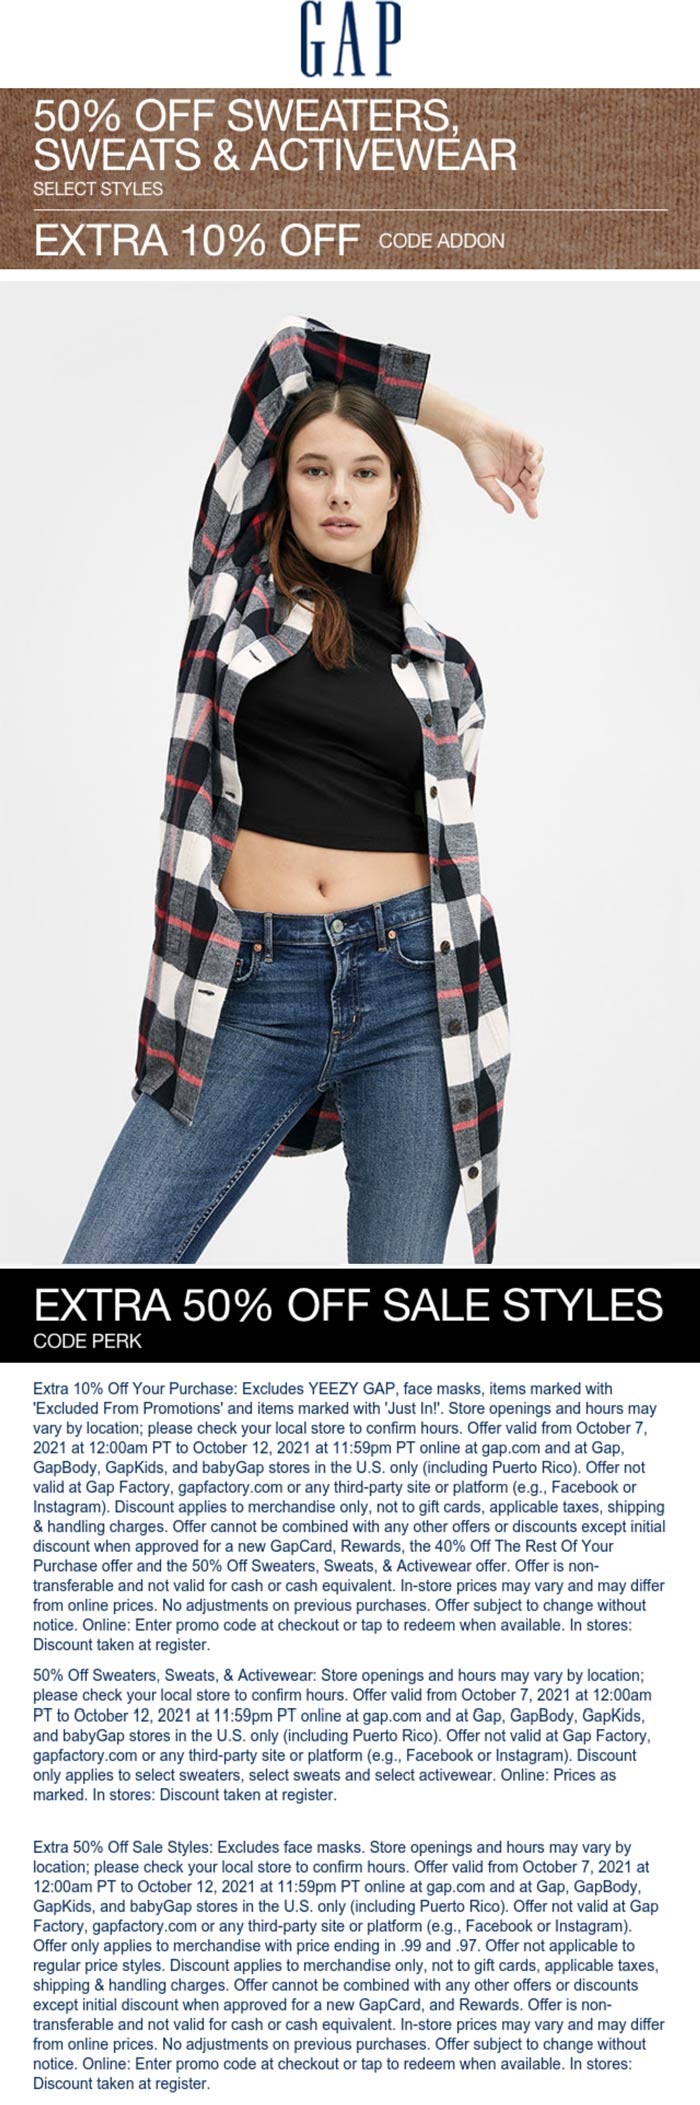 Gap stores Coupon  Extra 50% off sale styels & more at Gap, or online via promo codes PERK and ADDON #gap 